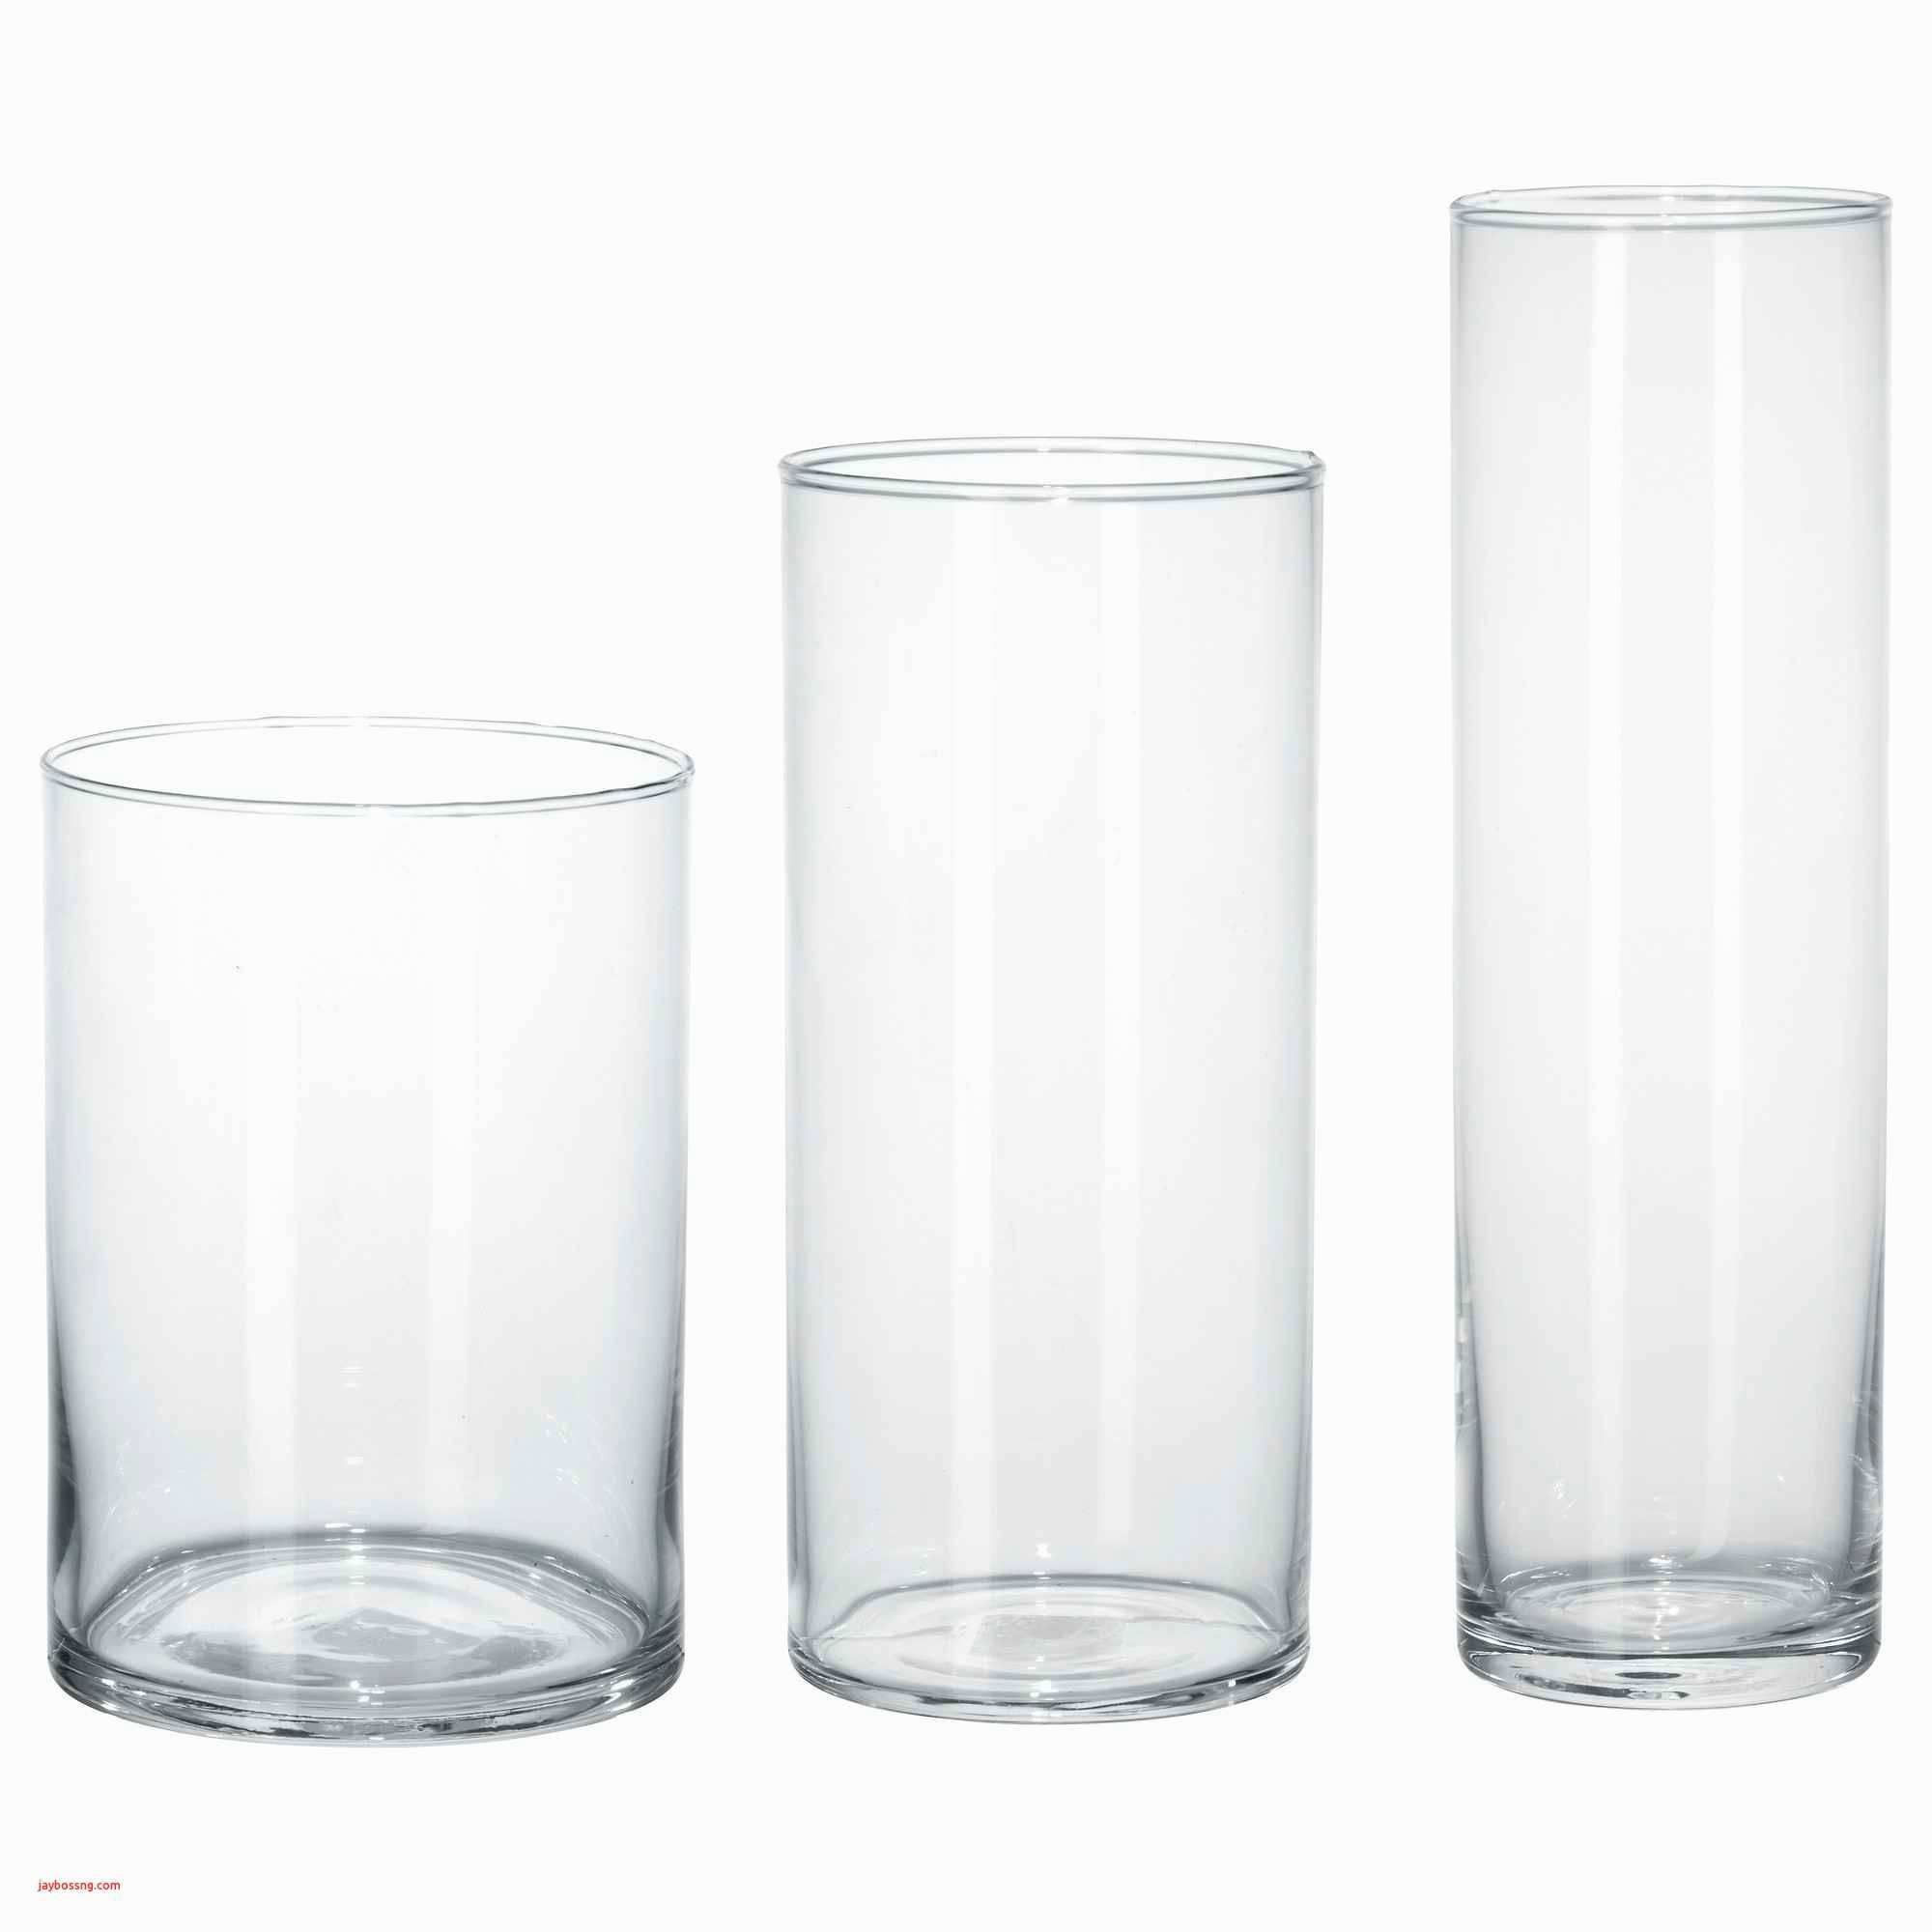 11 Fashionable Crystal Vases for Sale 2024 free download crystal vases for sale of 24 tall vases for sale the weekly world throughout 35 magnificent pedestal hurricane candle holders